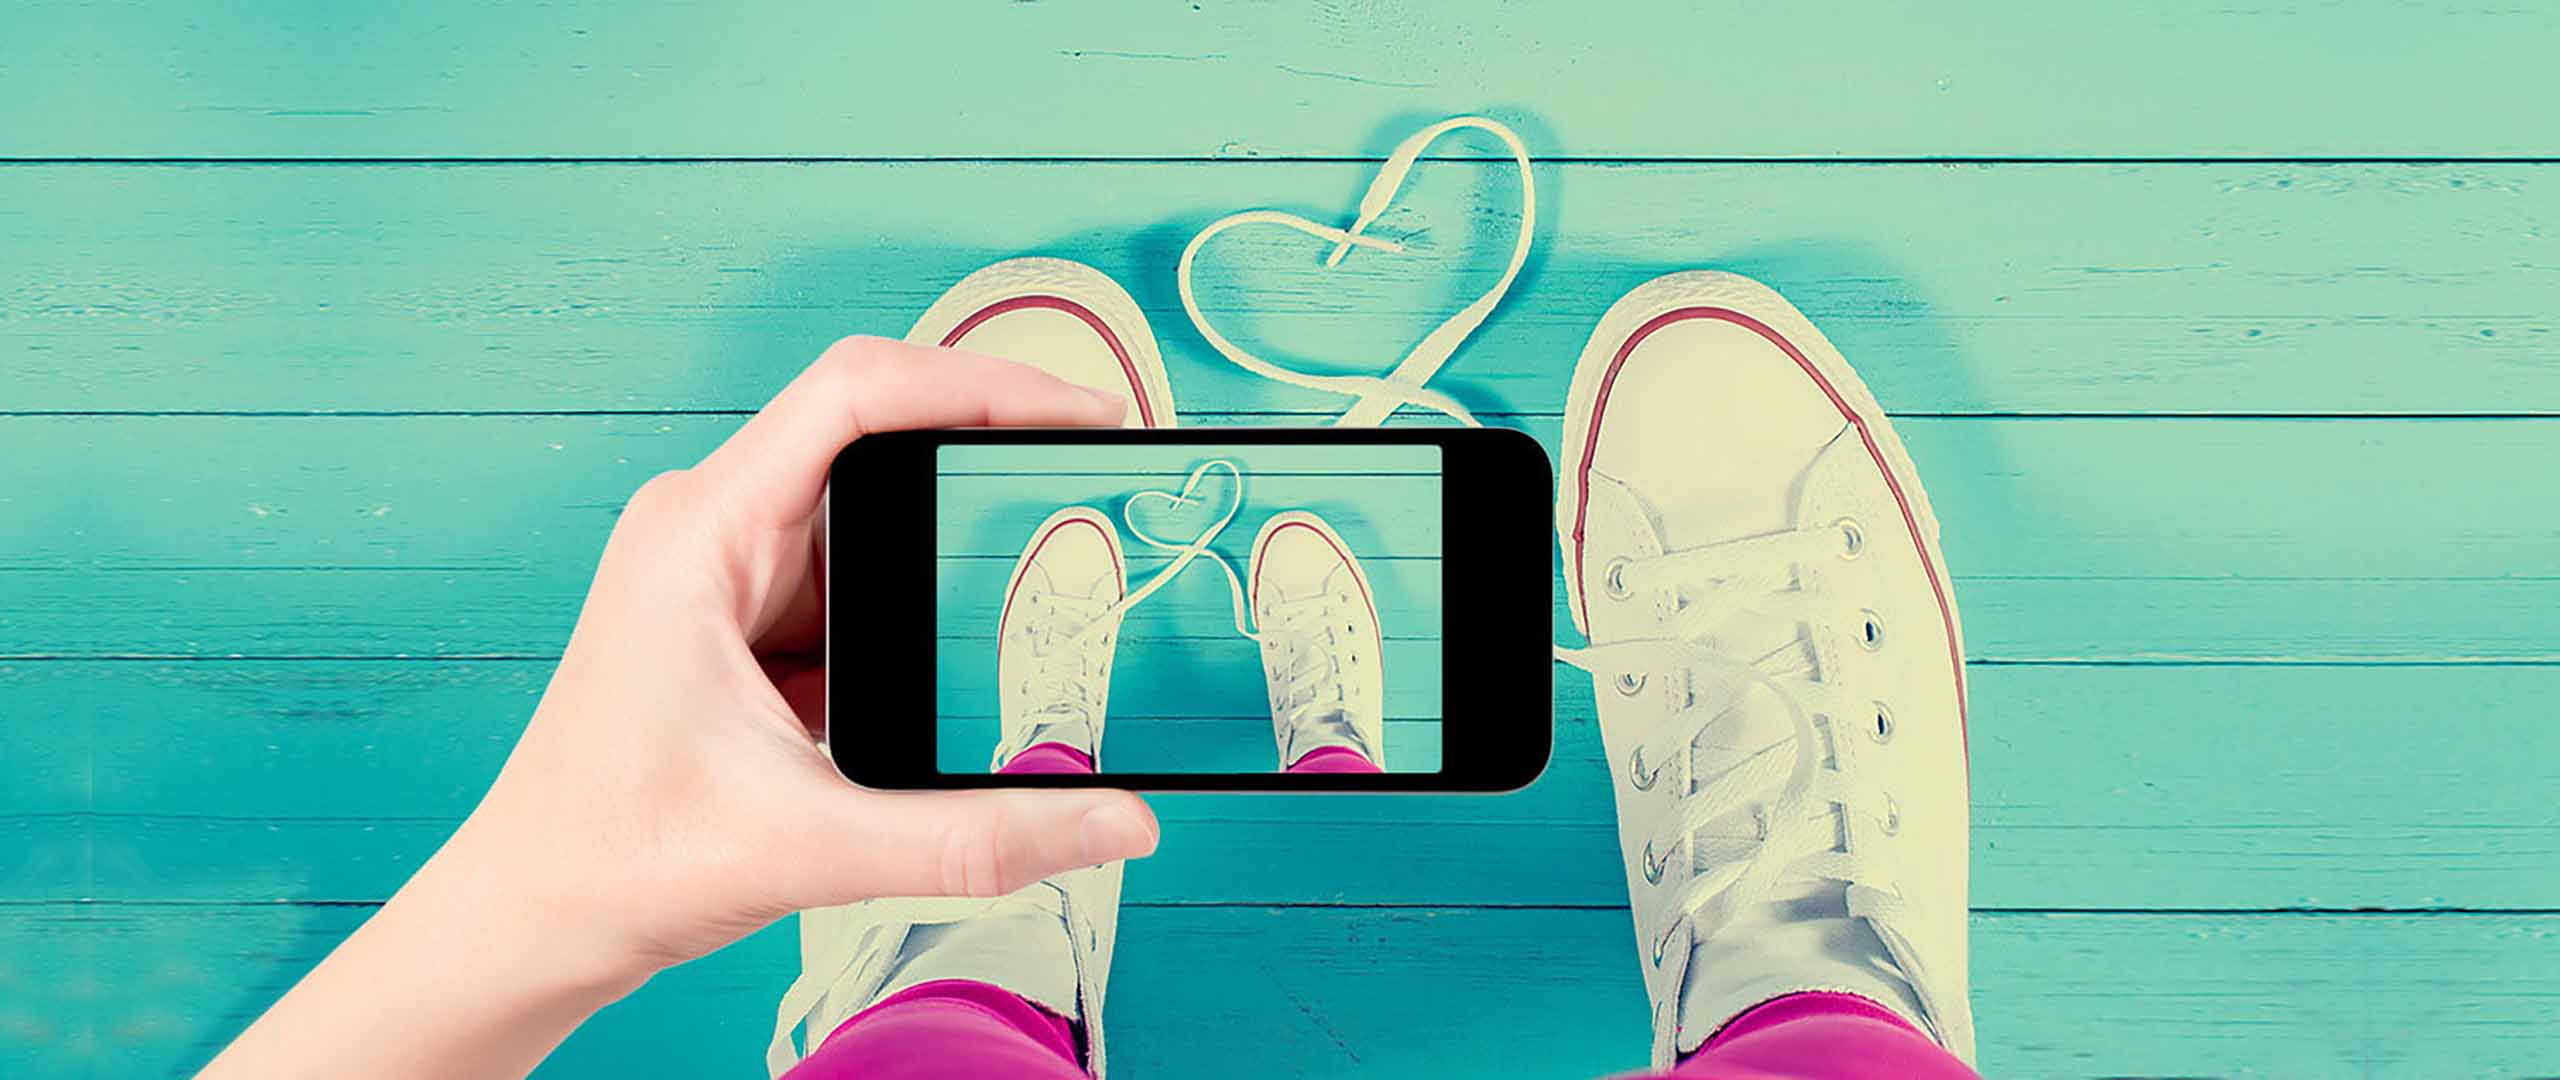 3 Ways To Use Instagram Video For Business